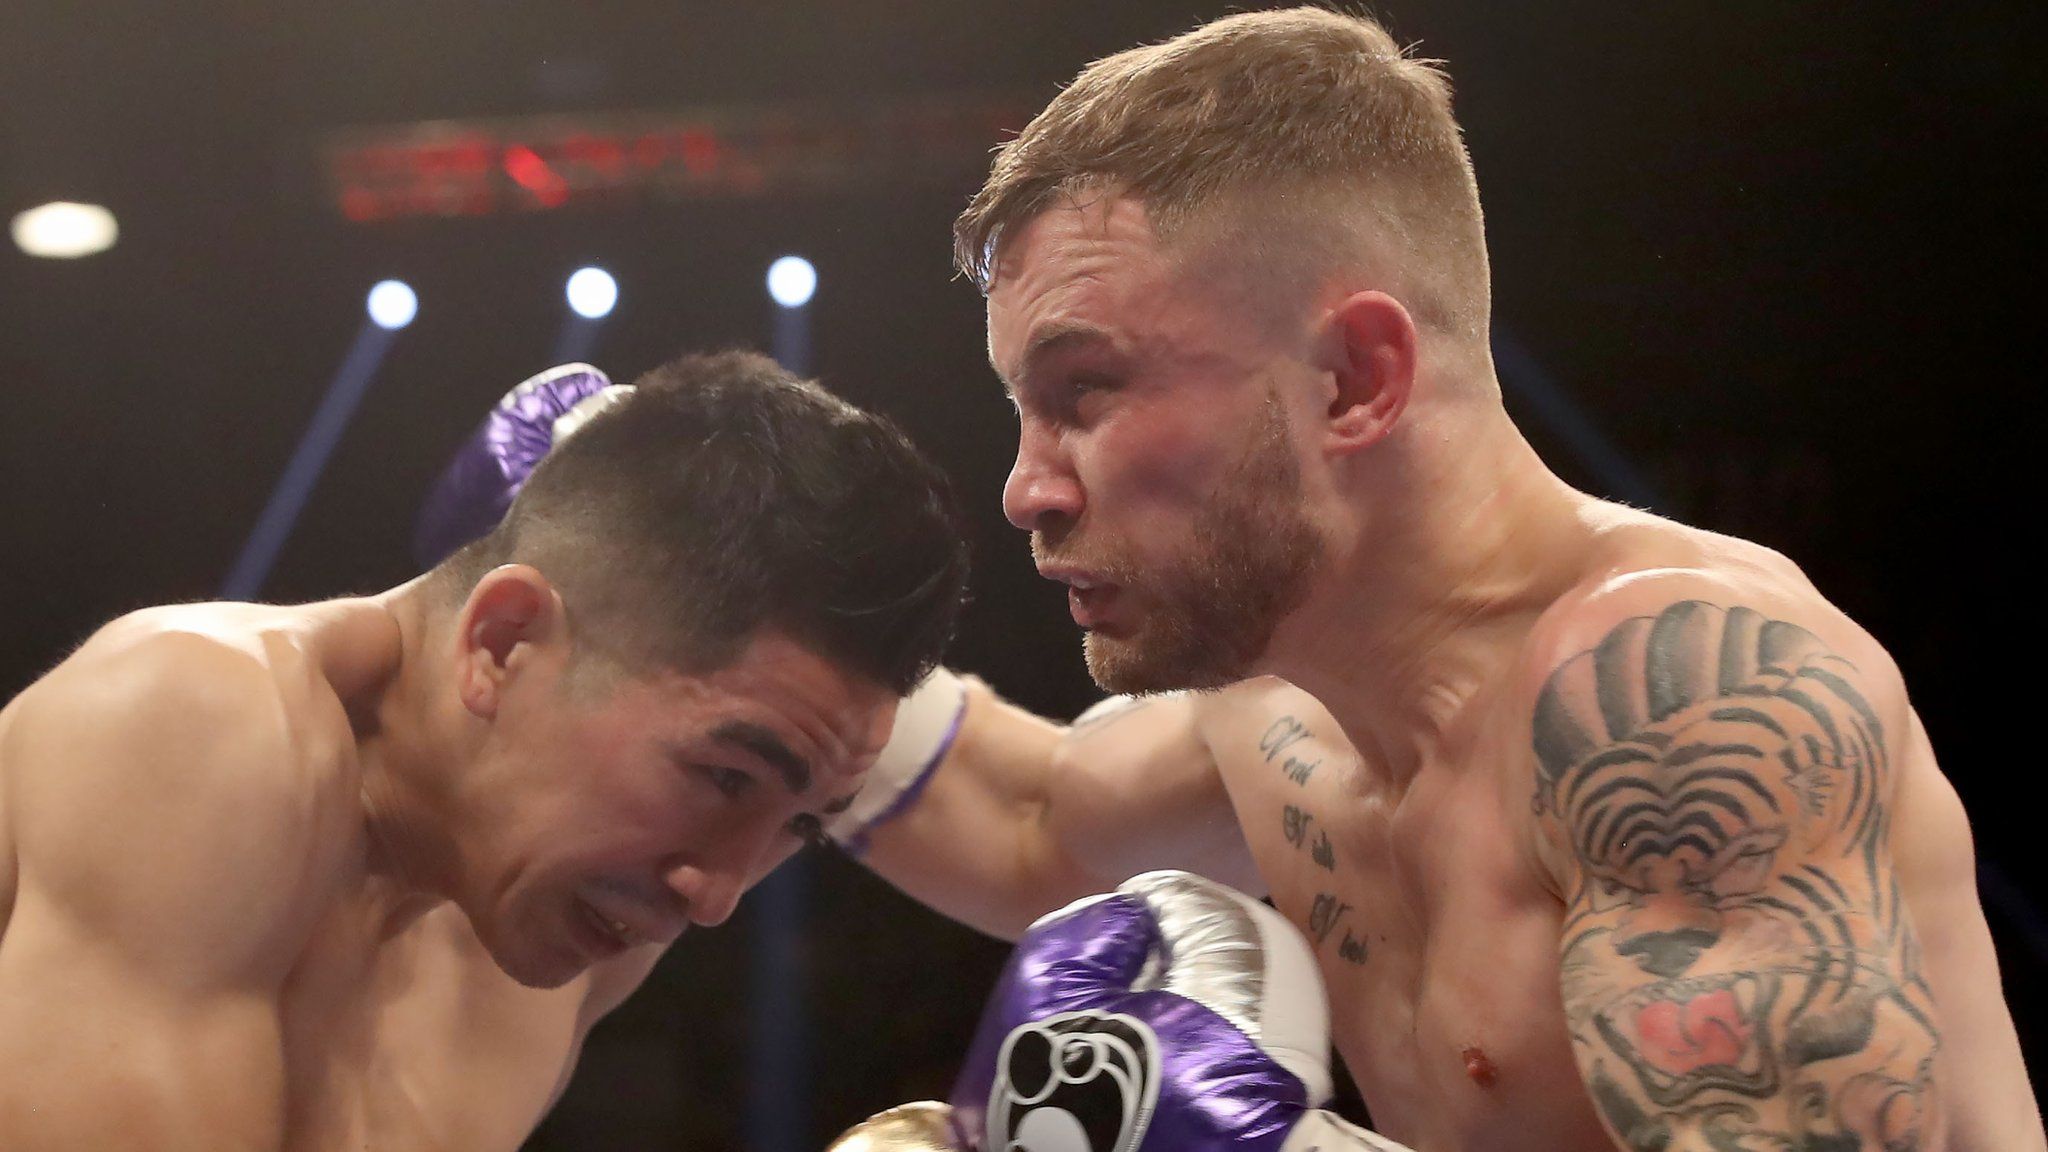 Carl Frampton was making the first defence of the WBA world featherweight title